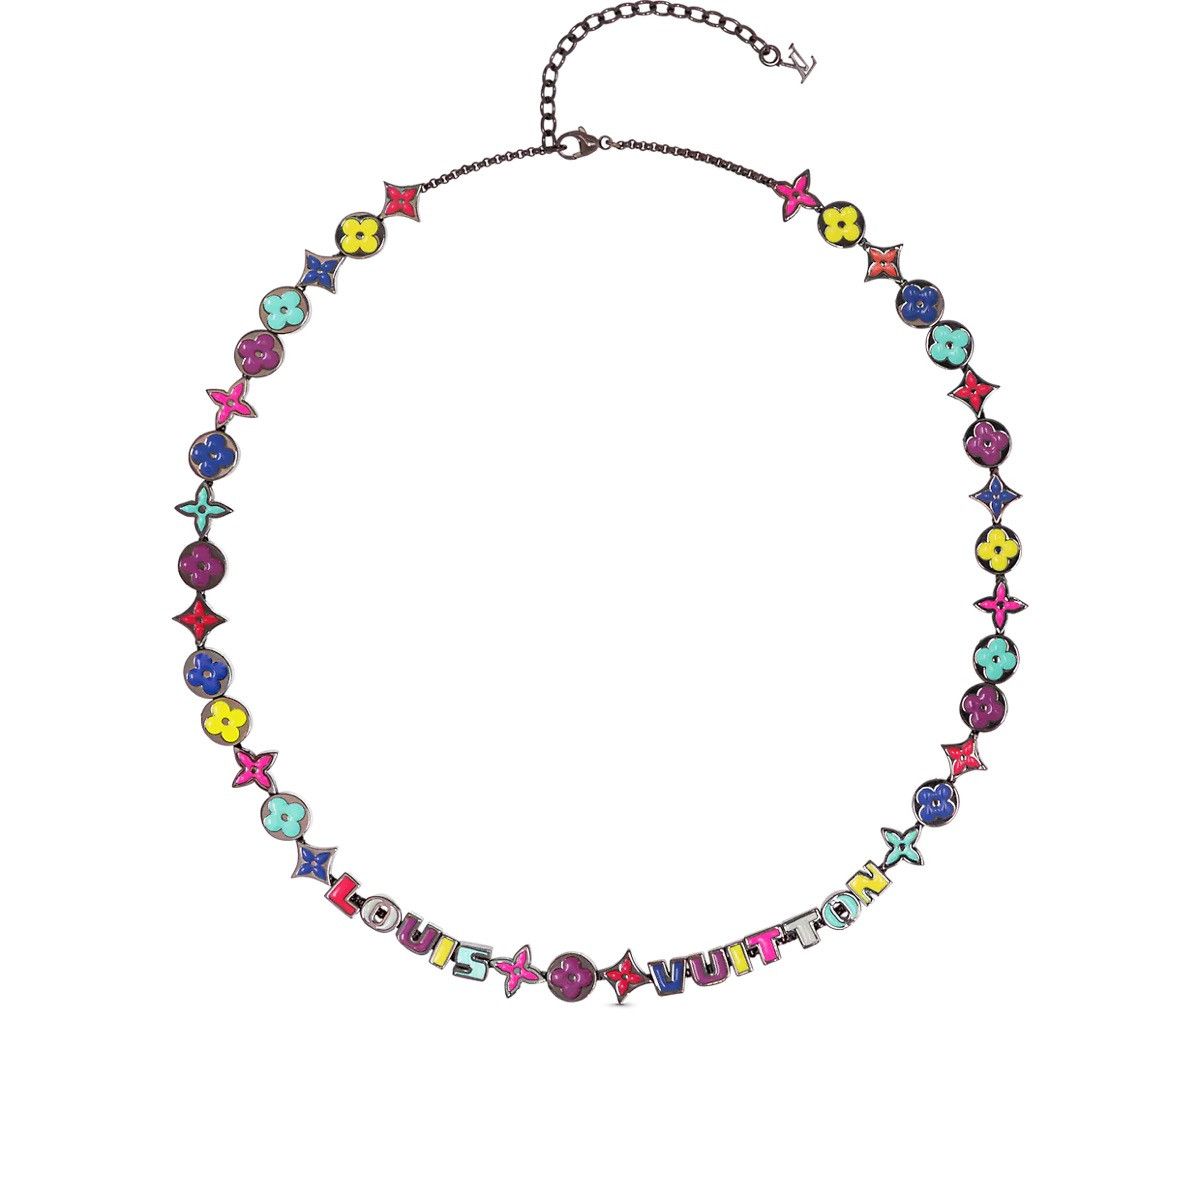 Louis Vuitton Mng Big Party Necklace, Multi, One Size